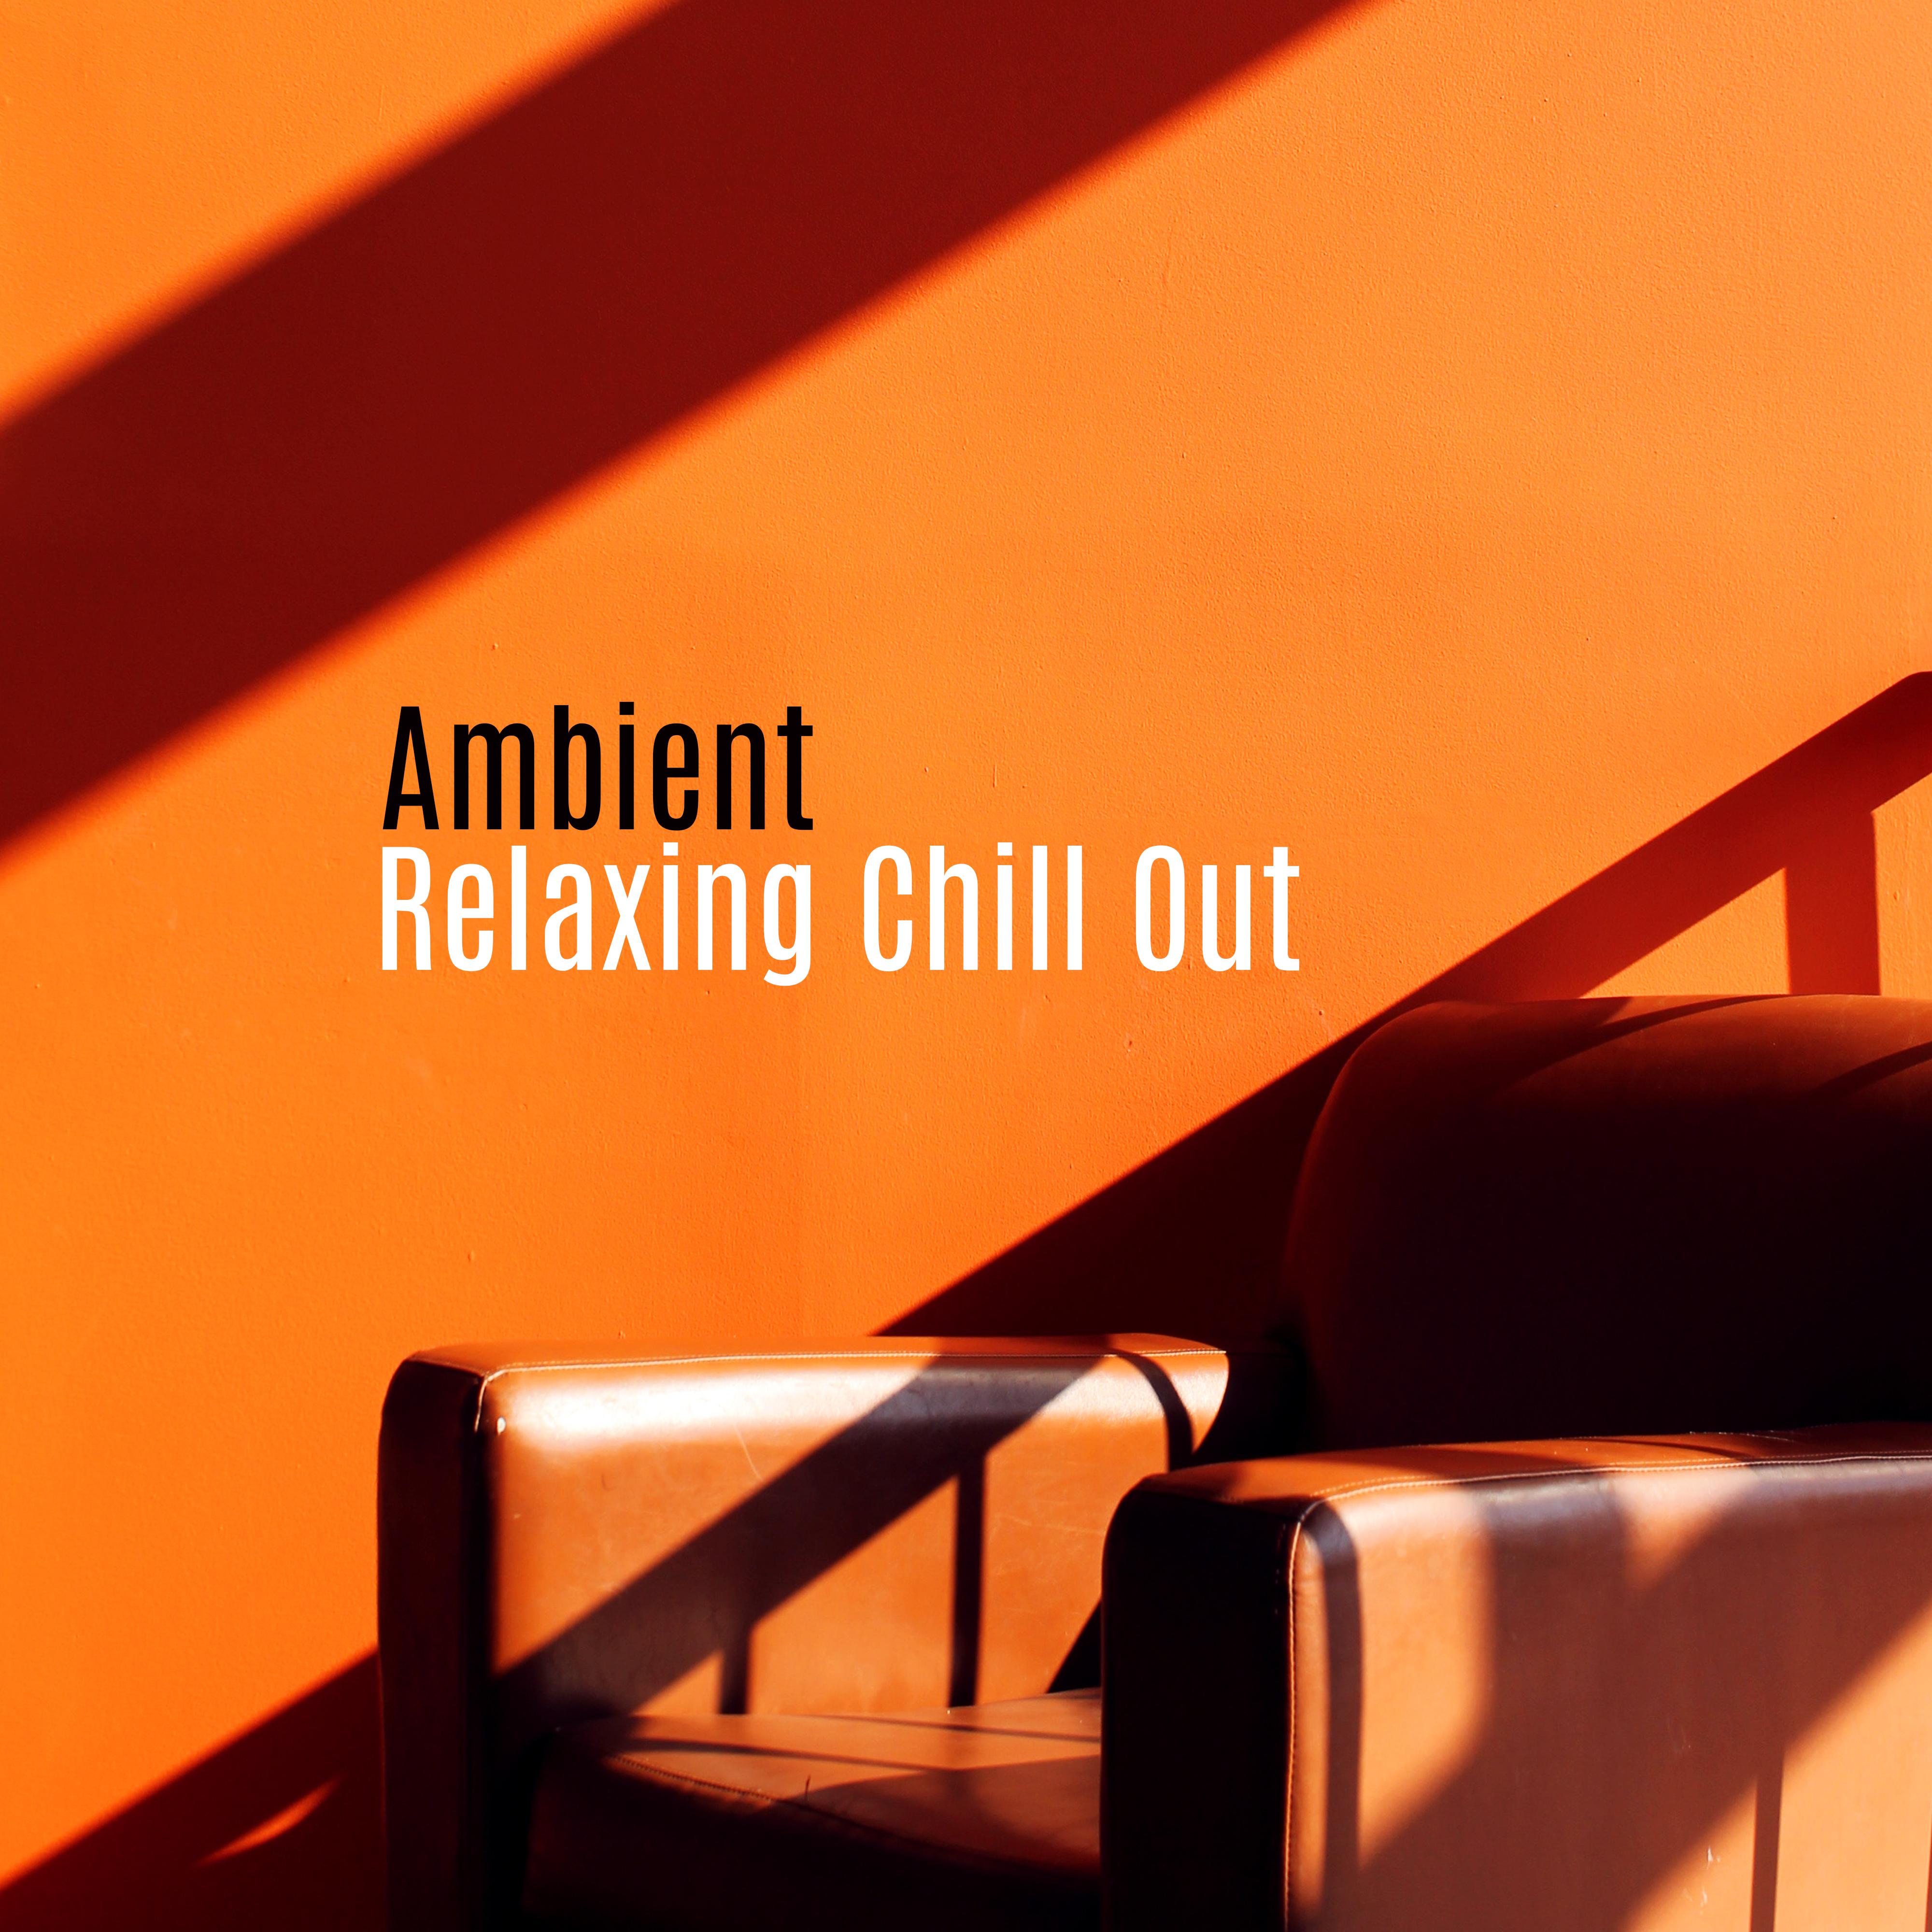 Ambient Relaxing Chill Out